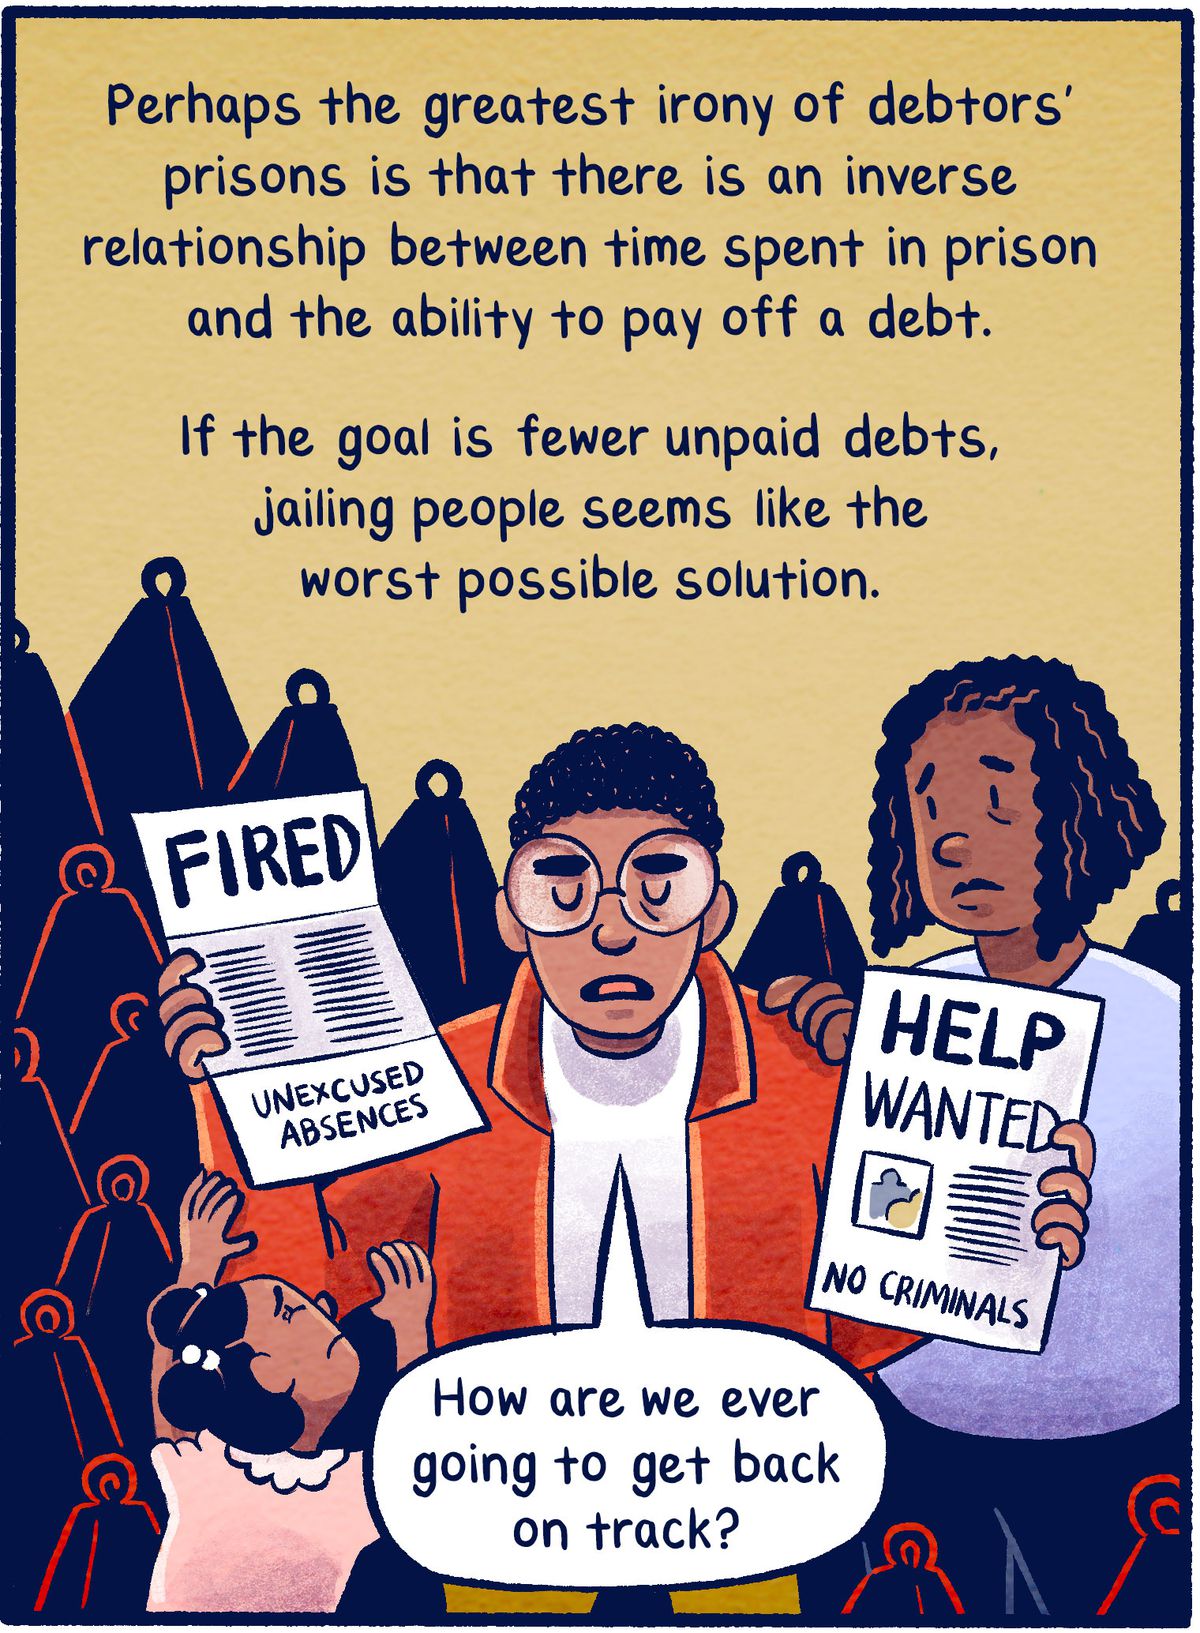 Perhaps the greatest irony of debtors’ prisons is that there is an inverse relationship between time spent in prison and the ability to pay off a debt. If the goal is fewer unpaid debts, jailing people seems like the worst possible solution.